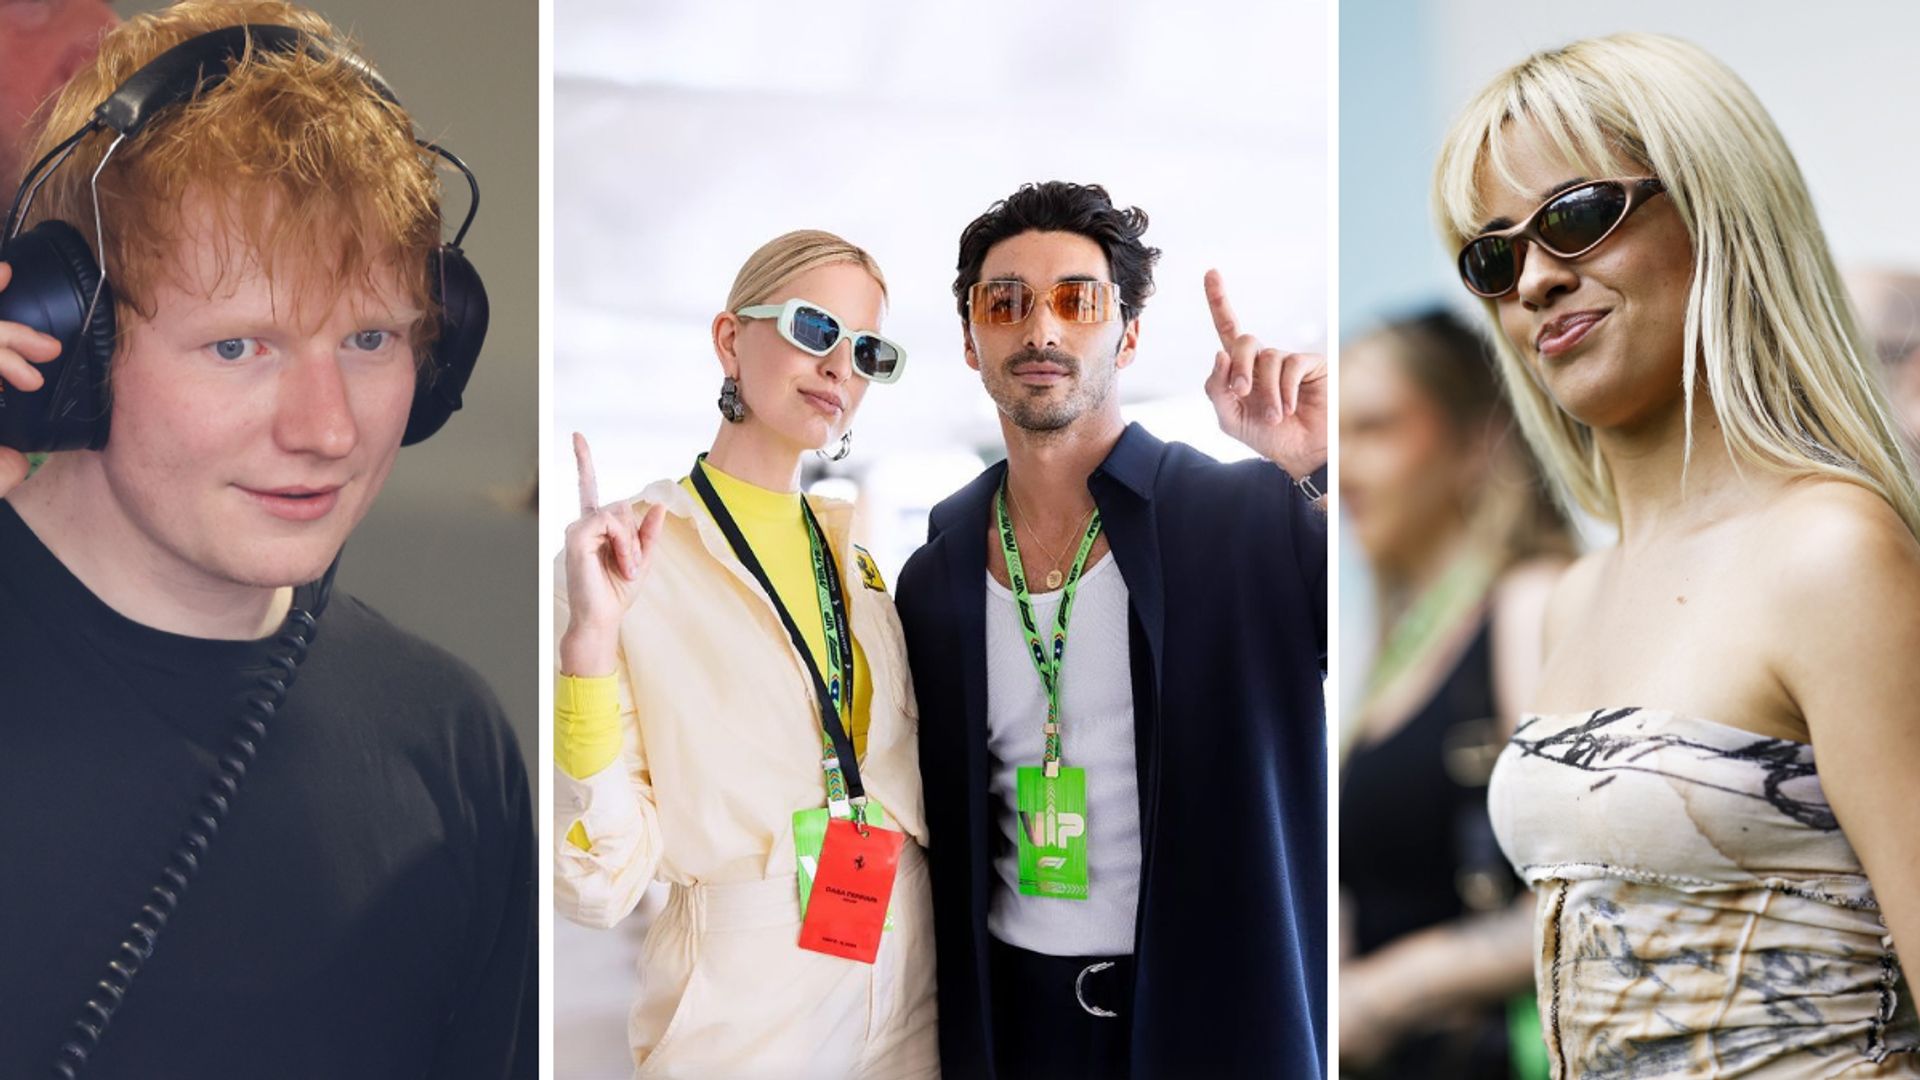 Ed Sheeran, Kendall Jenner and Camila Cabello: All the celebs at the F1 Miami Grand Prix